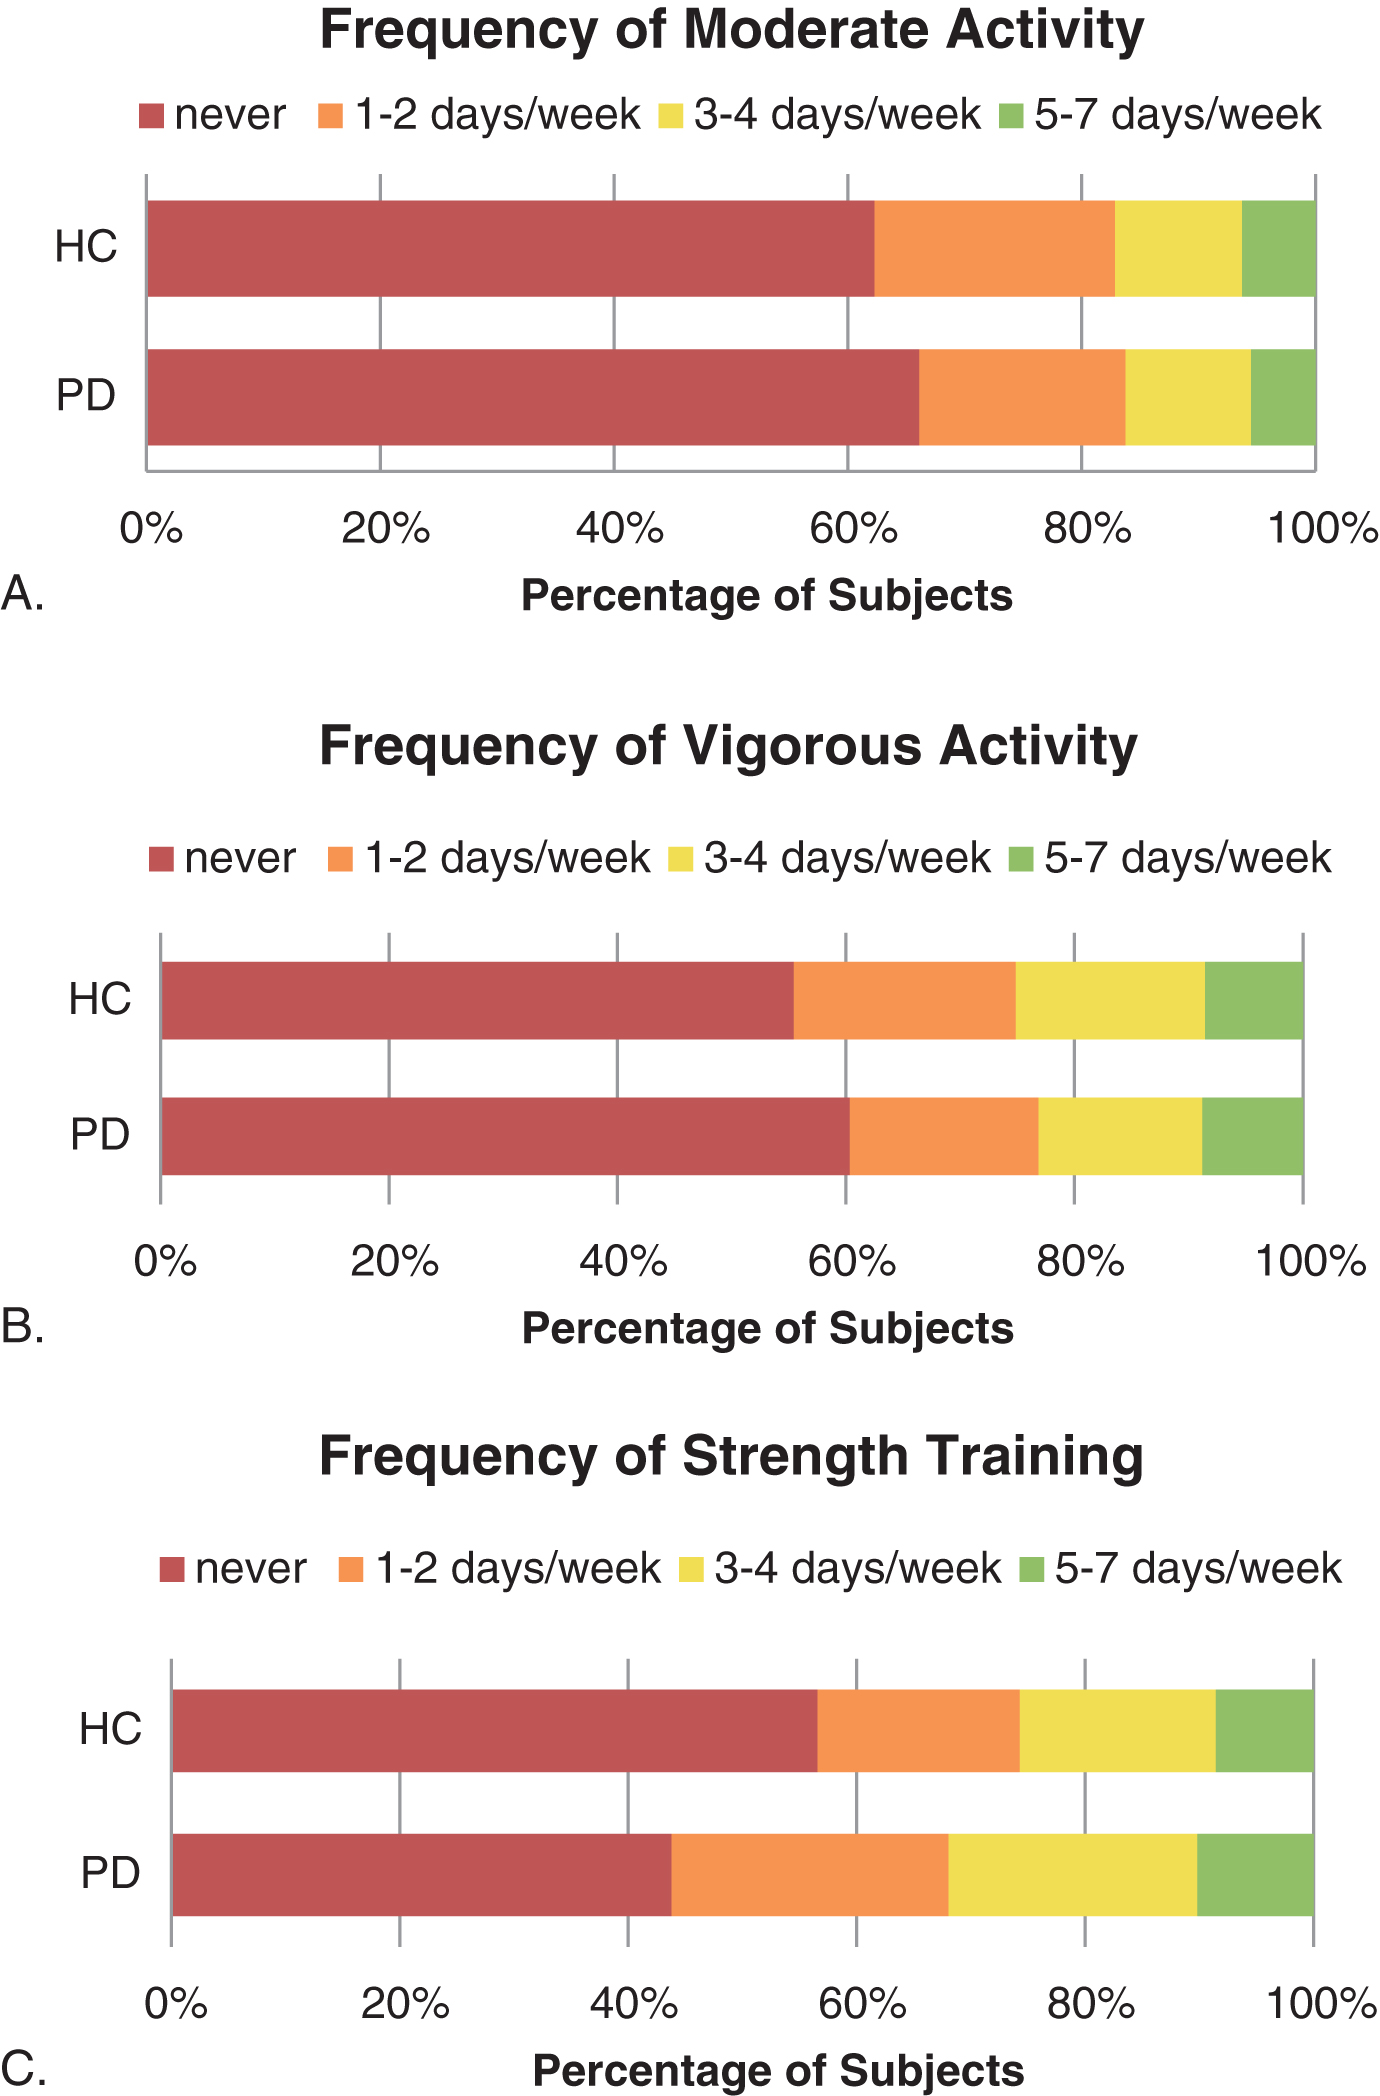 Percentage of subjects reporting Moderate, Vigorous, and Strength-based activities, by frequency (A-C).